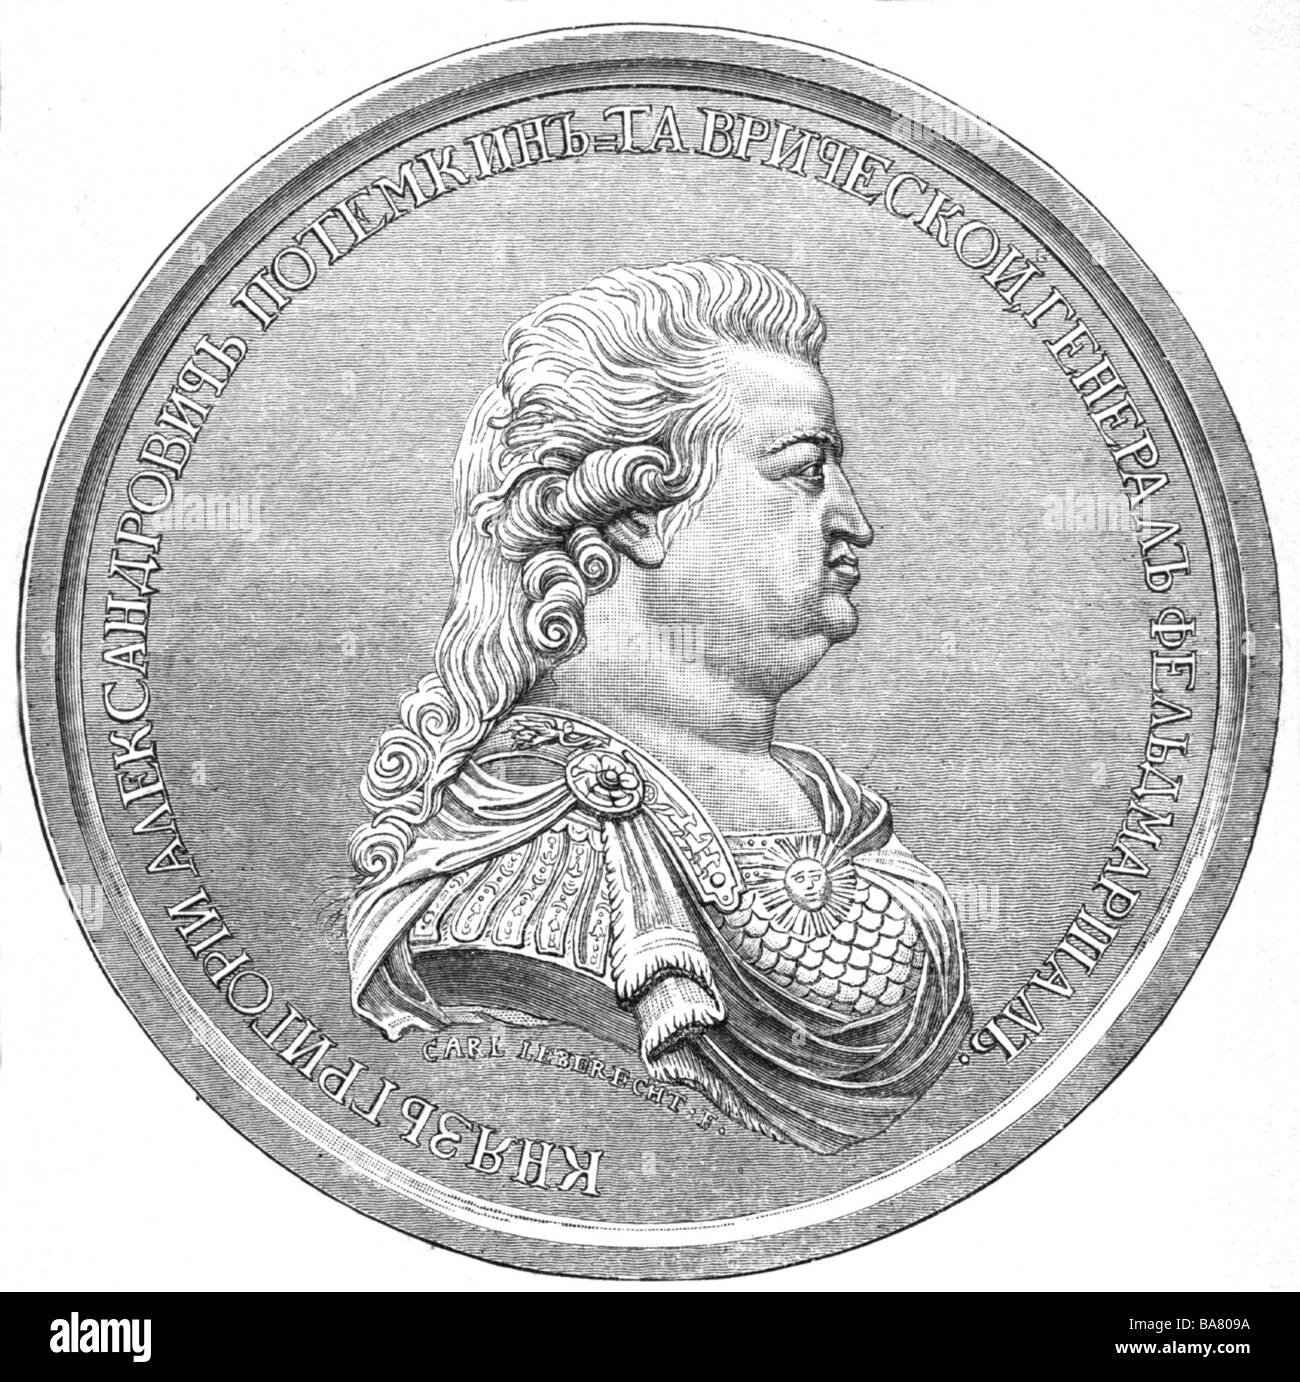 Potemkin, Grigori Alexandrovich, 13.9. (24.9.) 1739 - 4.10. (16.10.) 1791, Russian general and politician, portrait, medol in memory of his journey to Tauria, wood engraving, 19th century, , Stock Photo